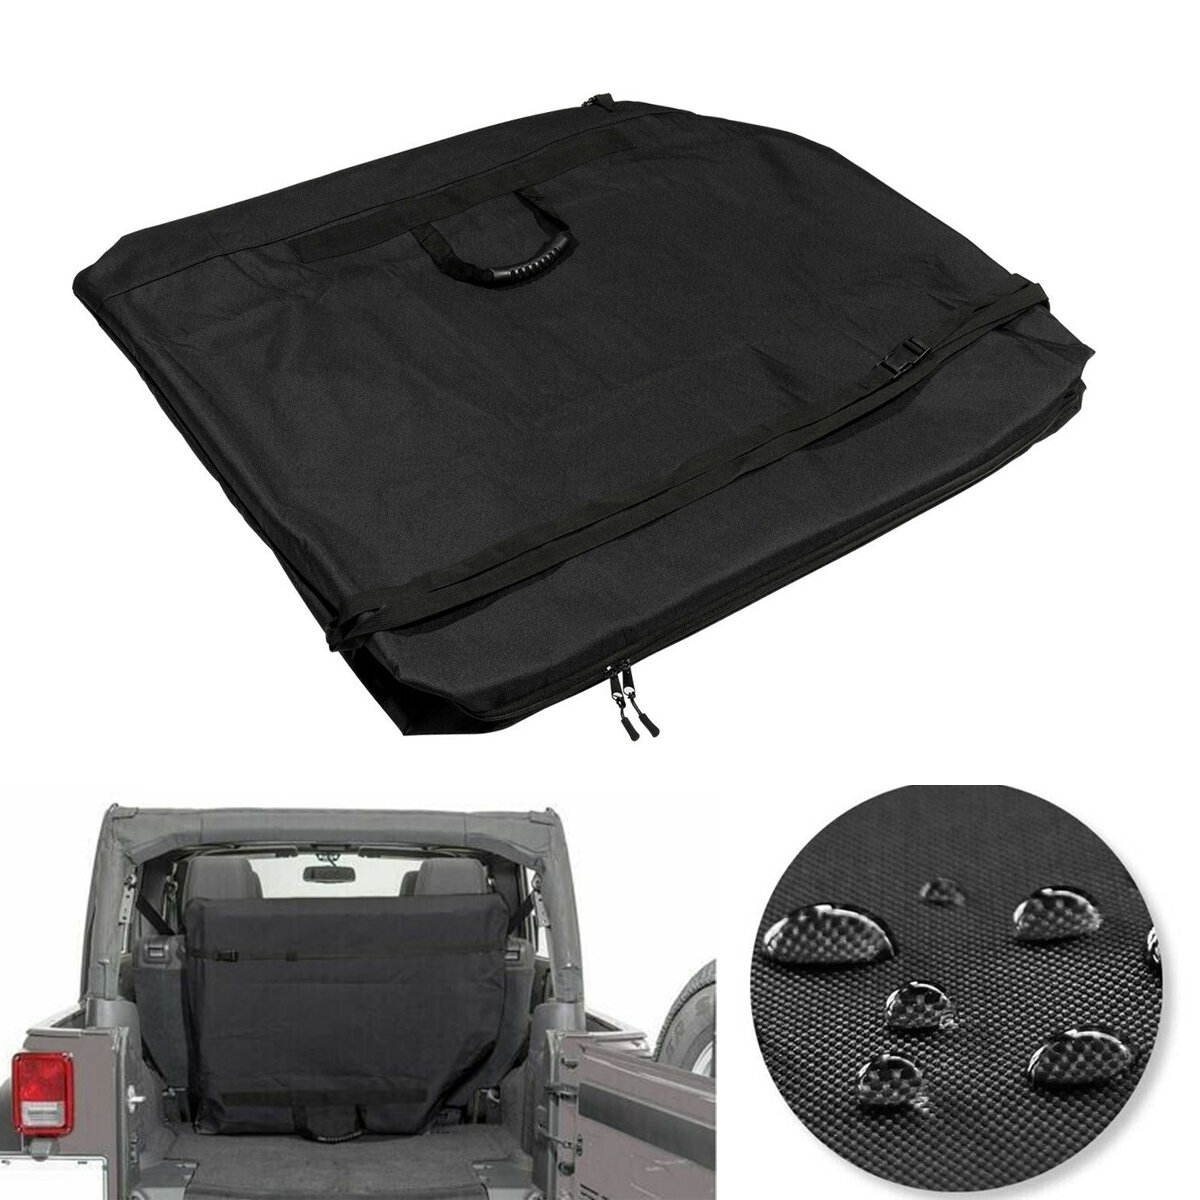 Freedom Panel Hard Tops Storage Bag With Handle For Jeep For Wrangler JK JL 2007-2020, Banggood  - buy with discount